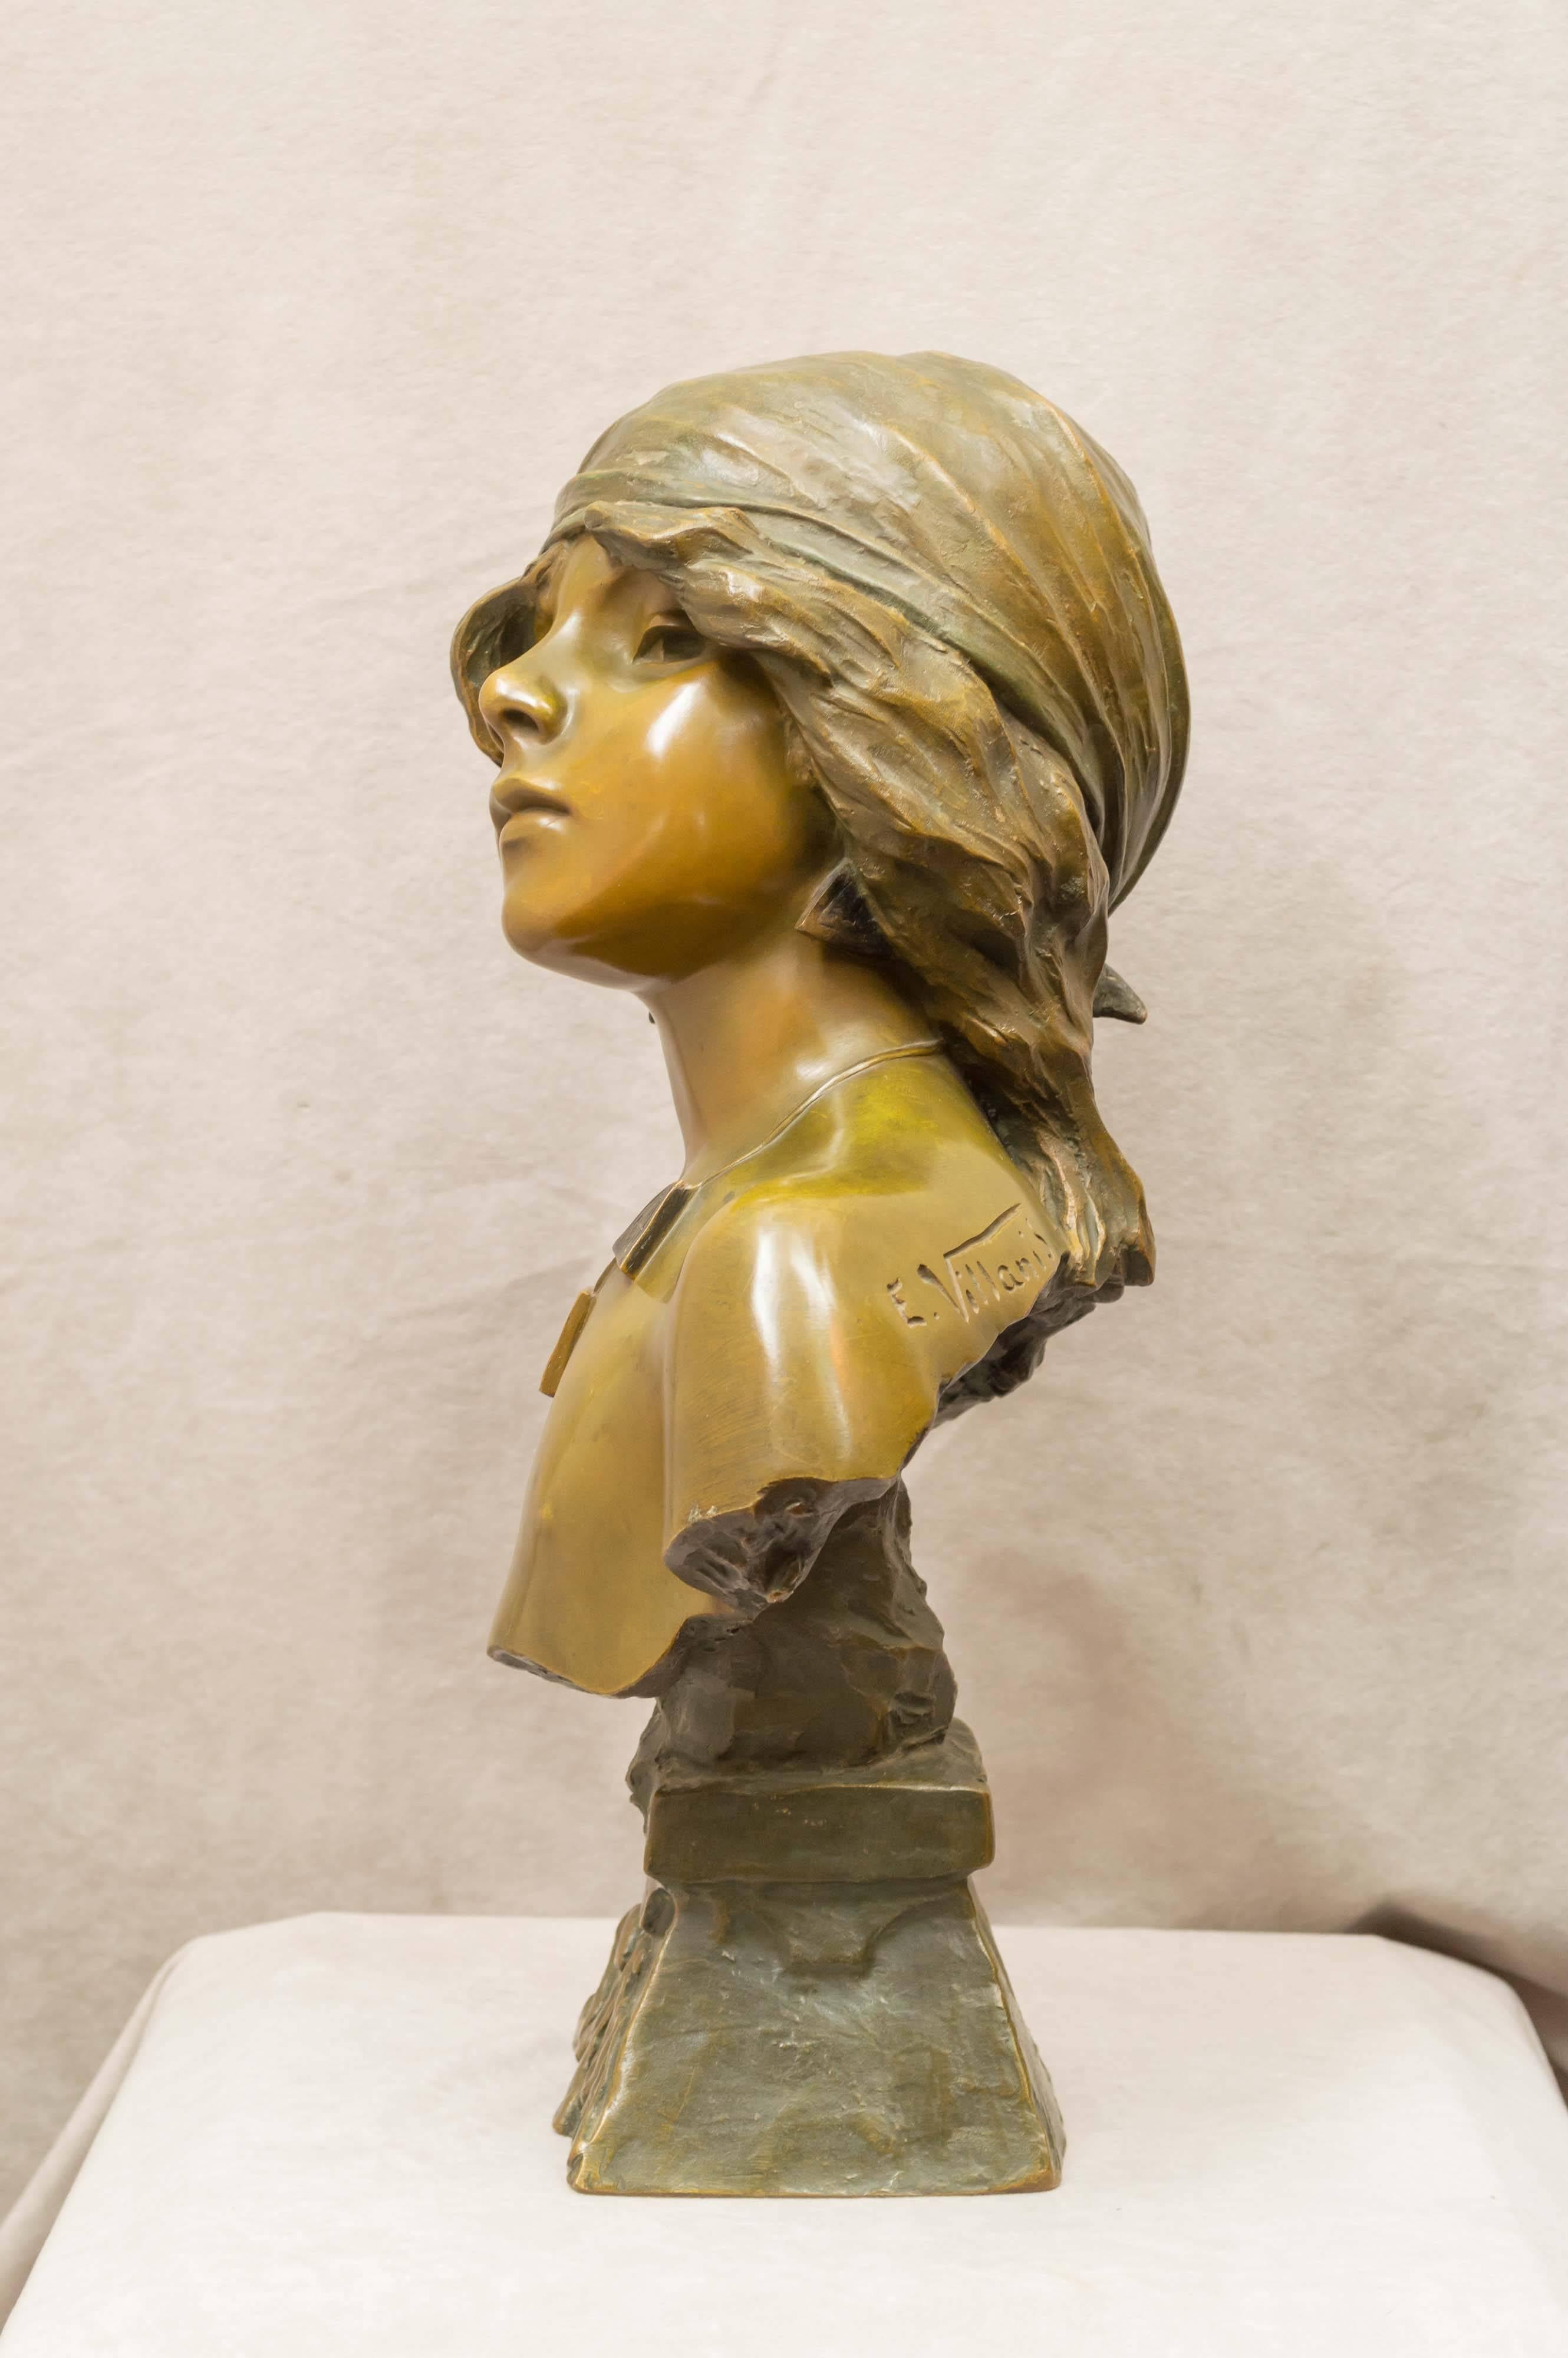 Villanis was one of the most prolific artists working in France during the turn of the 19th century. He is known for his beautiful women sculptures, which always have defined modelling and luscious patina. This particular model has an unusual light